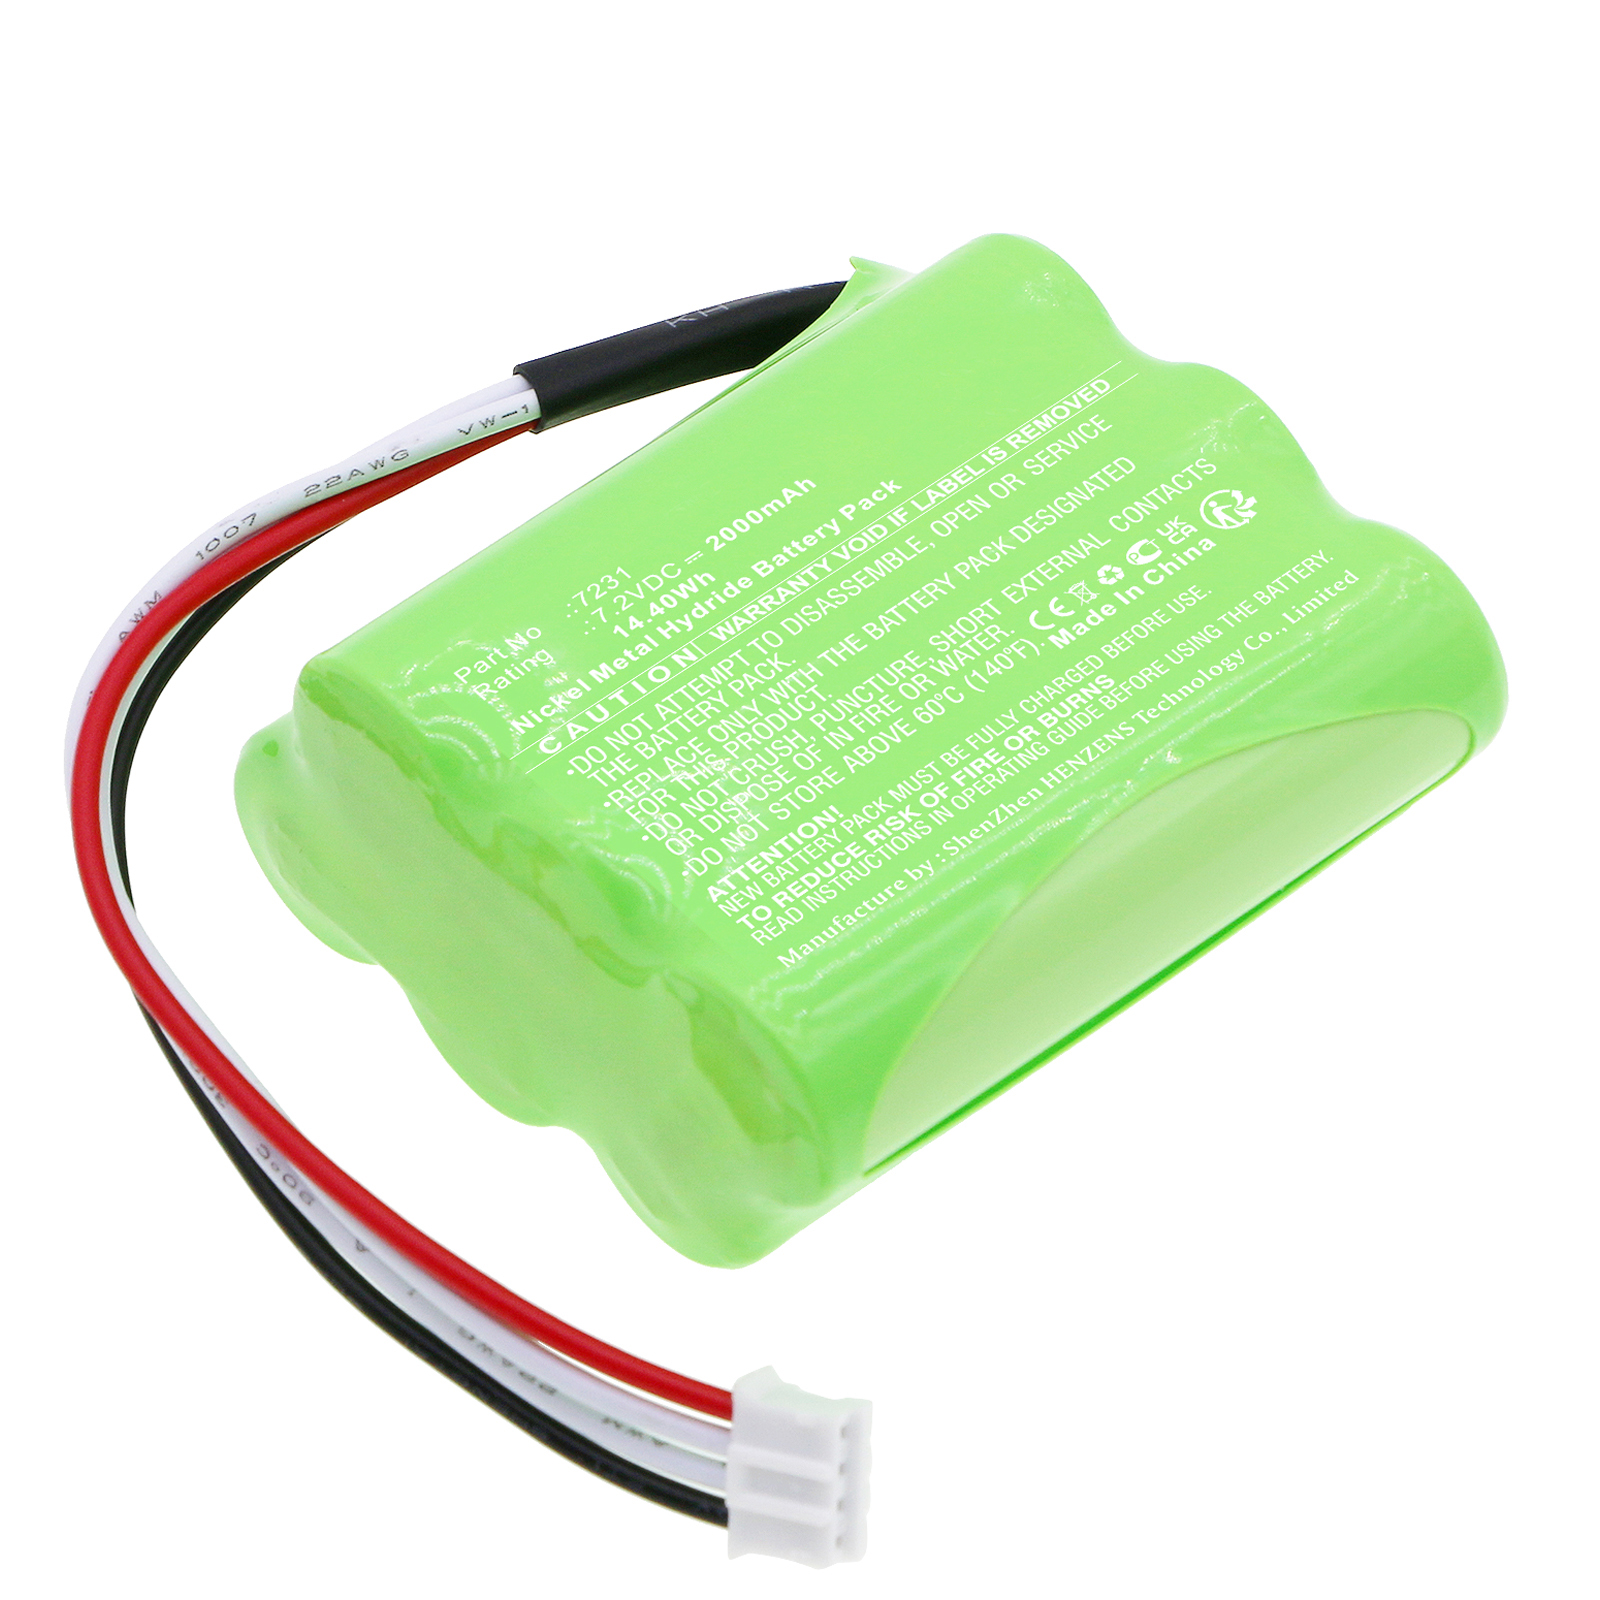 Synergy Digital Medical Battery, Compatible with Zevex 7231 Medical Battery (Ni-MH, 7.2V, 2000mAh)